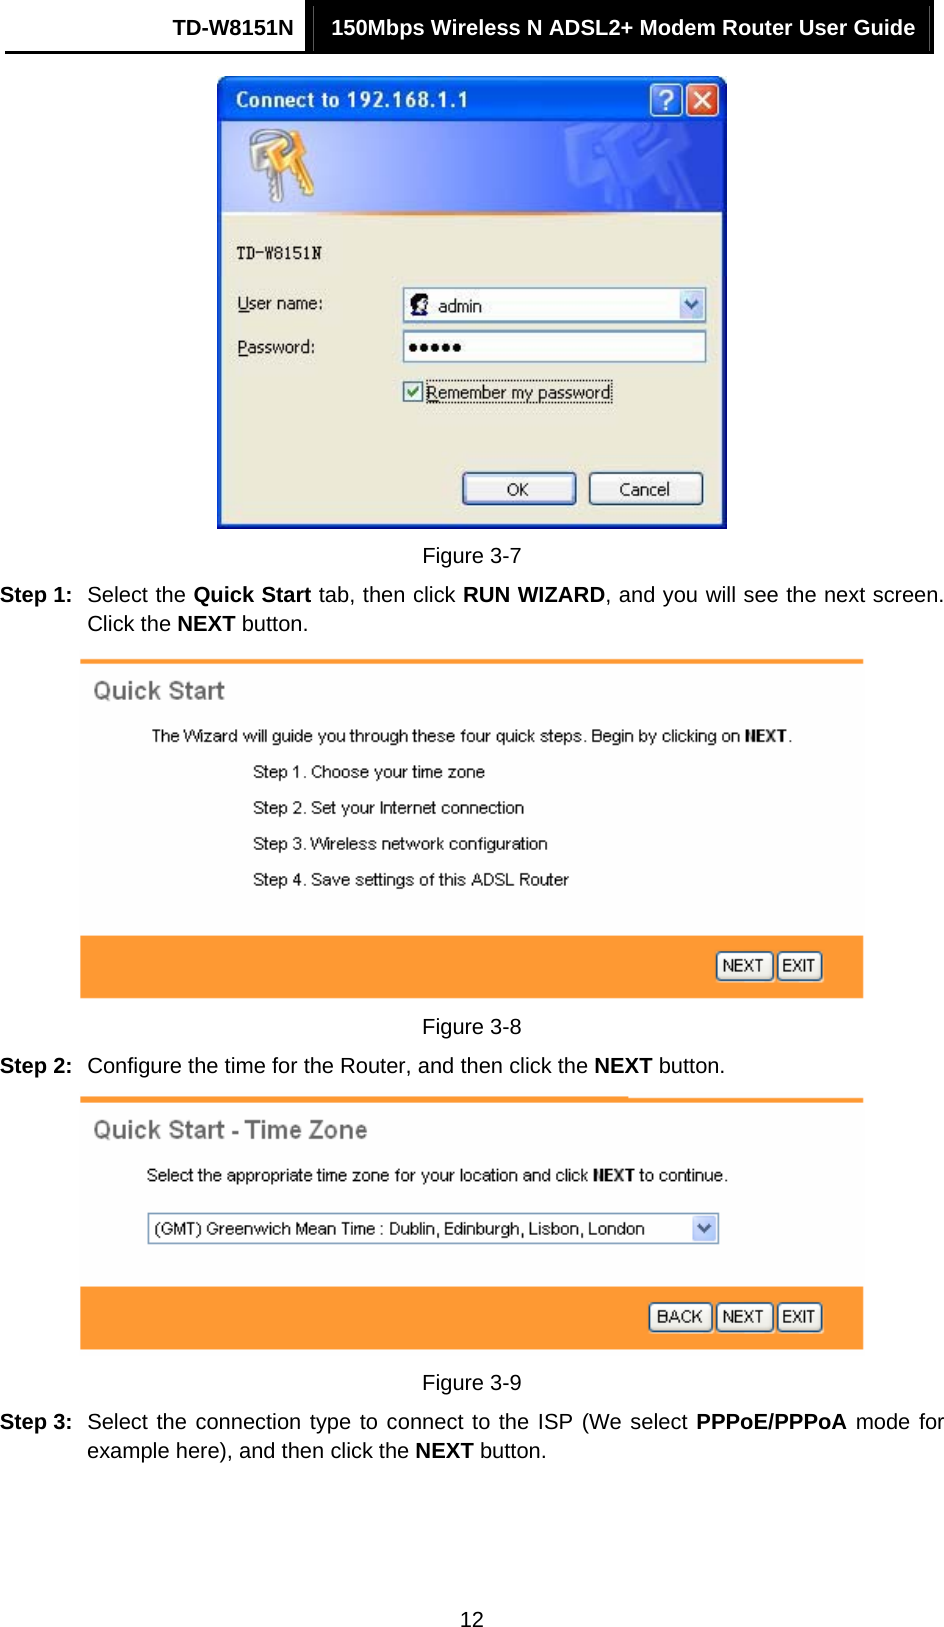 TD-W8151N  150Mbps Wireless N ADSL2+ Modem Router User Guide  12 Figure 3-7 Step 1:  Select the Quick Start tab, then click RUN WIZARD, and you will see the next screen. Click the NEXT button.  Figure 3-8 Step 2:  Configure the time for the Router, and then click the NEXT button.  Figure 3-9 Step 3:  Select the connection type to connect to the ISP (We select PPPoE/PPPoA mode for example here), and then click the NEXT button. 